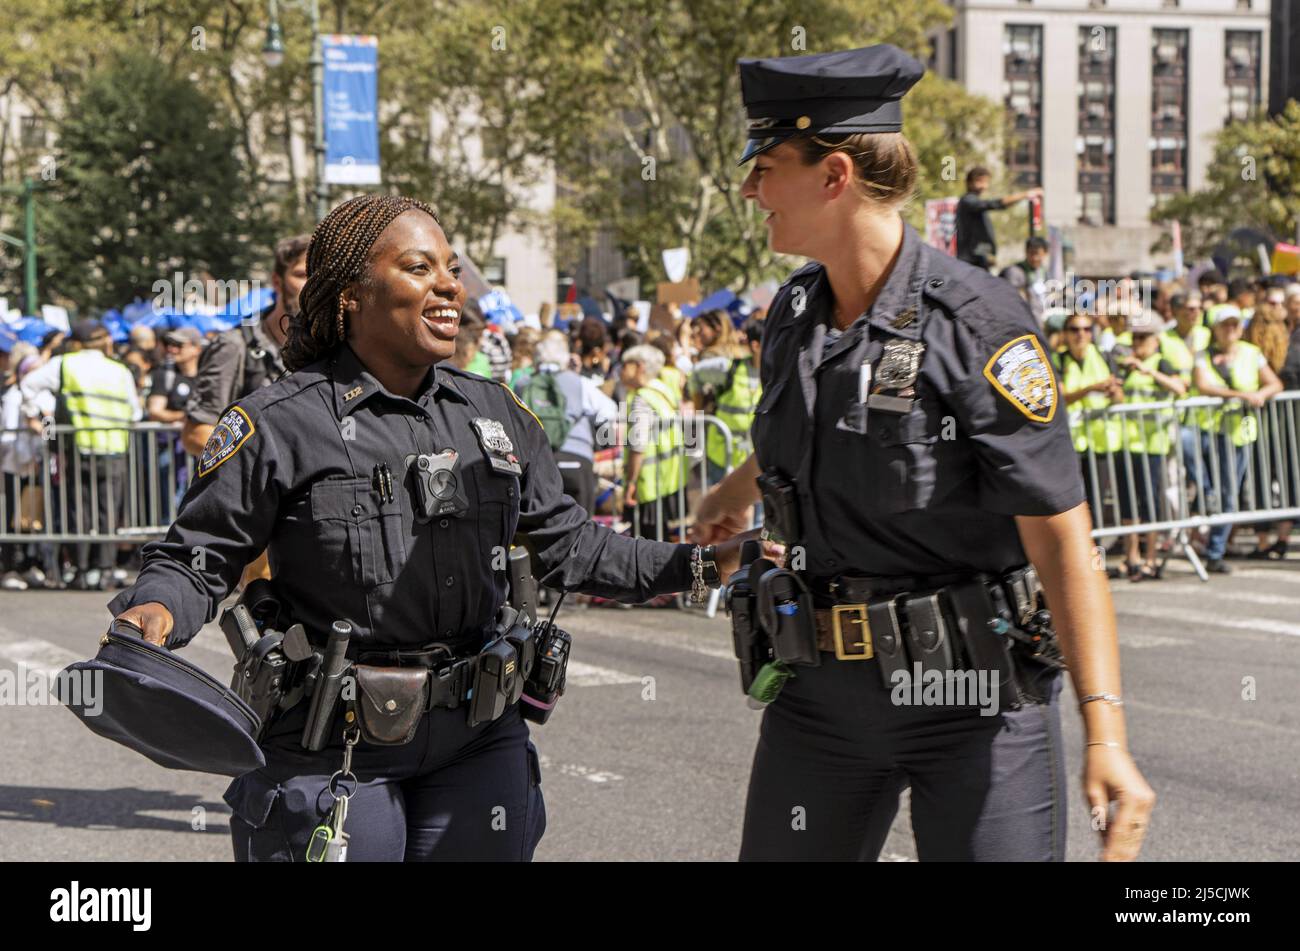 USA, New York, Sept. 20, 2019 New York City Global Climate Strike in New York on Sept. 20, 2019. female police officers. Thousands of New York City students walk out of school to attend a rally on climate change. In what may be the largest climate protest in history, inspired by young Swedish activist Greta Thunberg. [automated translation] Stock Photo